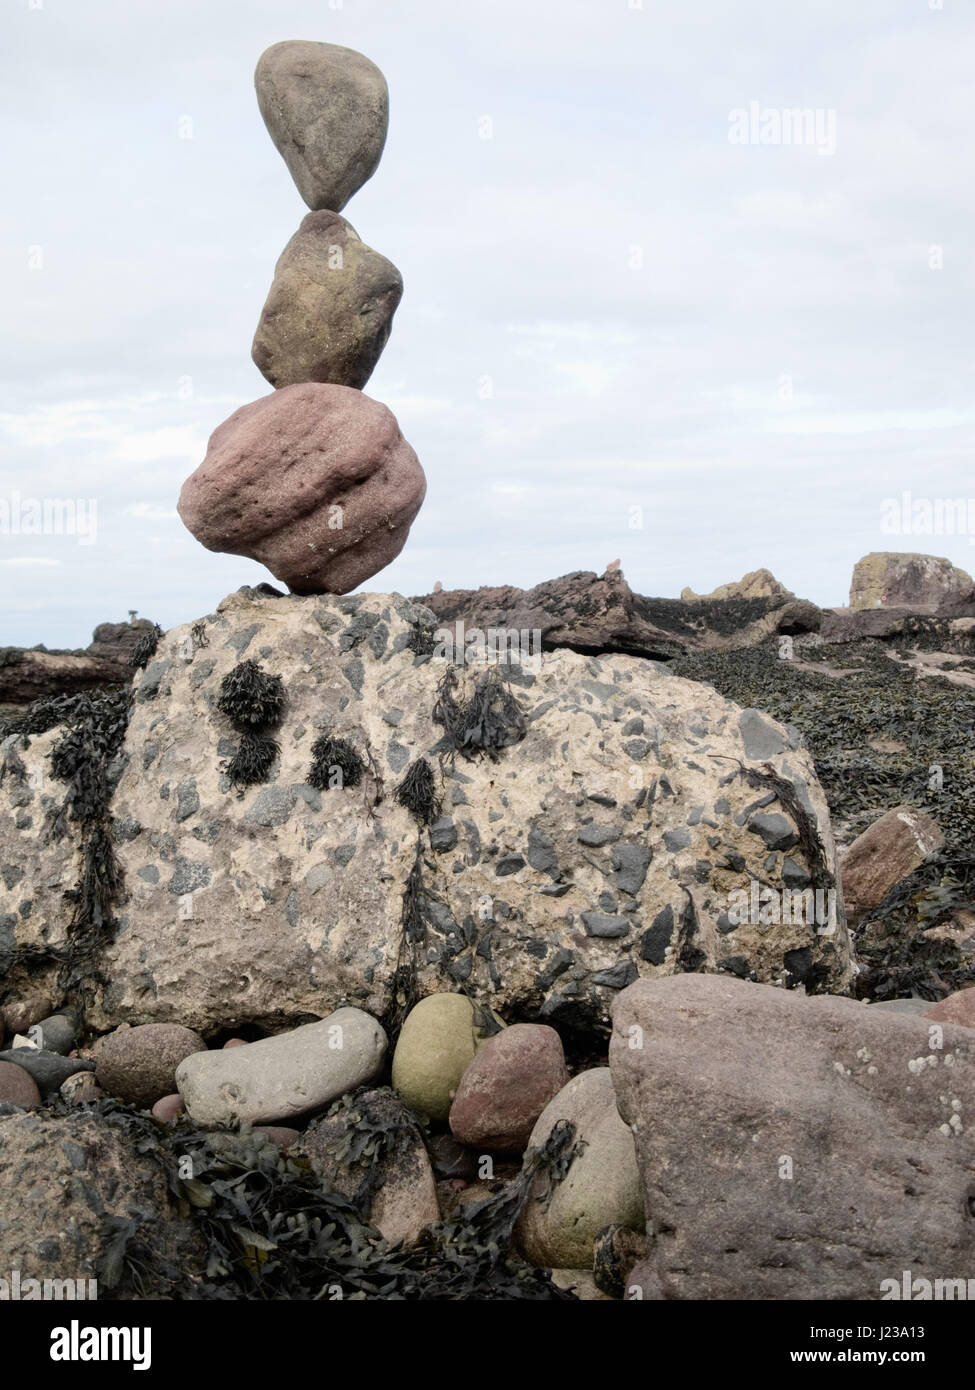 Balanced stones from the European Stone Stacking Championships held on 22nd April 2017 on a Dunbar beach. Stock Photo